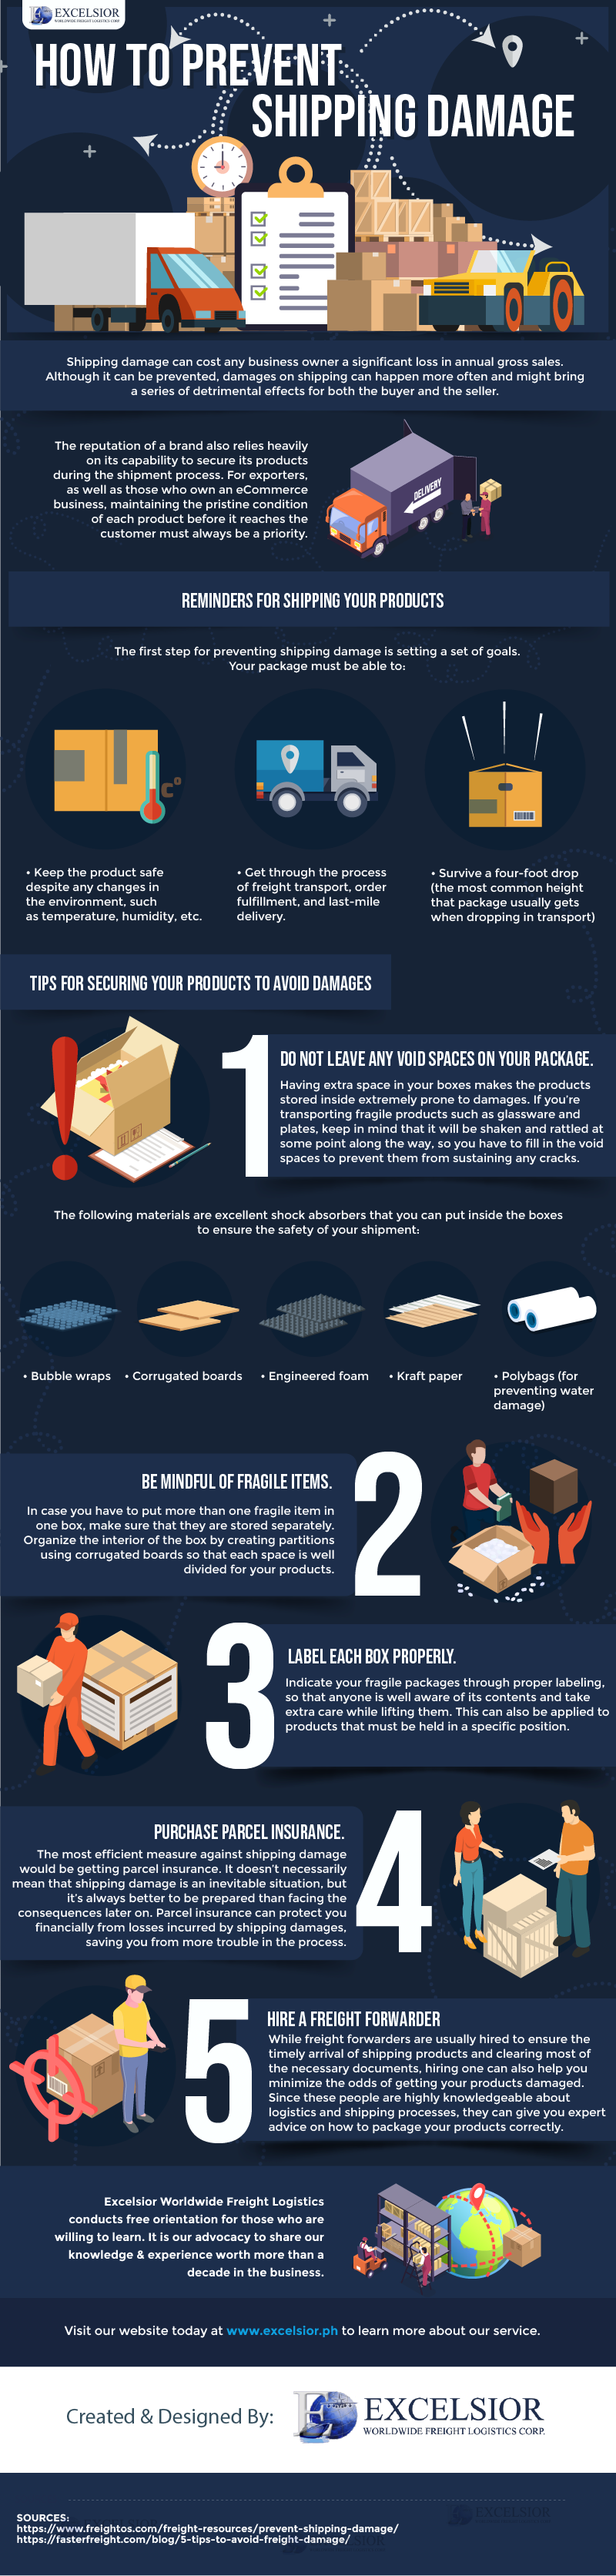 How to Prevent Shipping Damage - Infographic